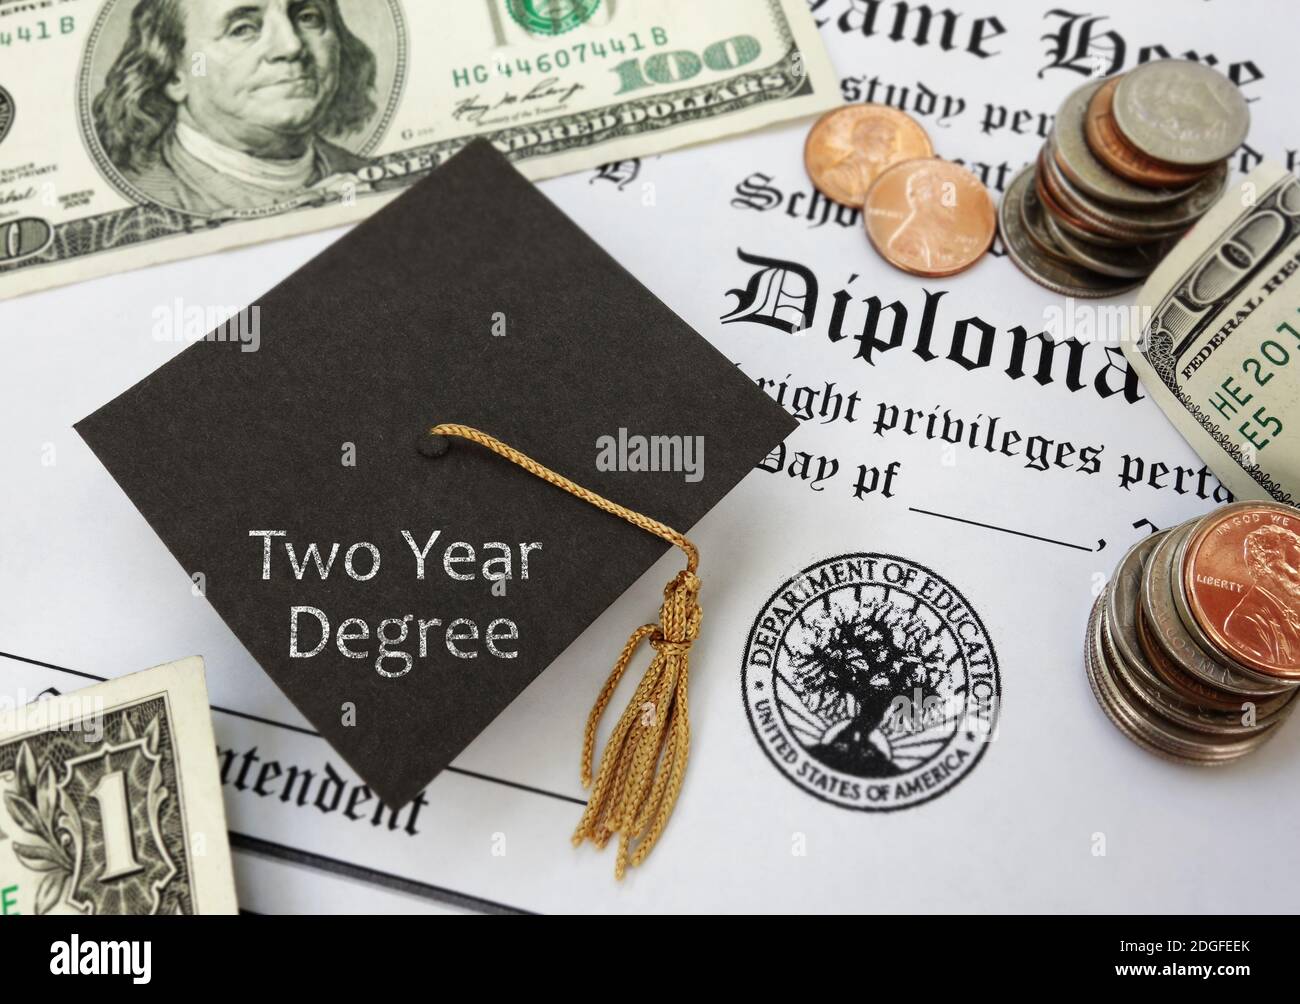 Two Year Degree college graduate Stock Photo